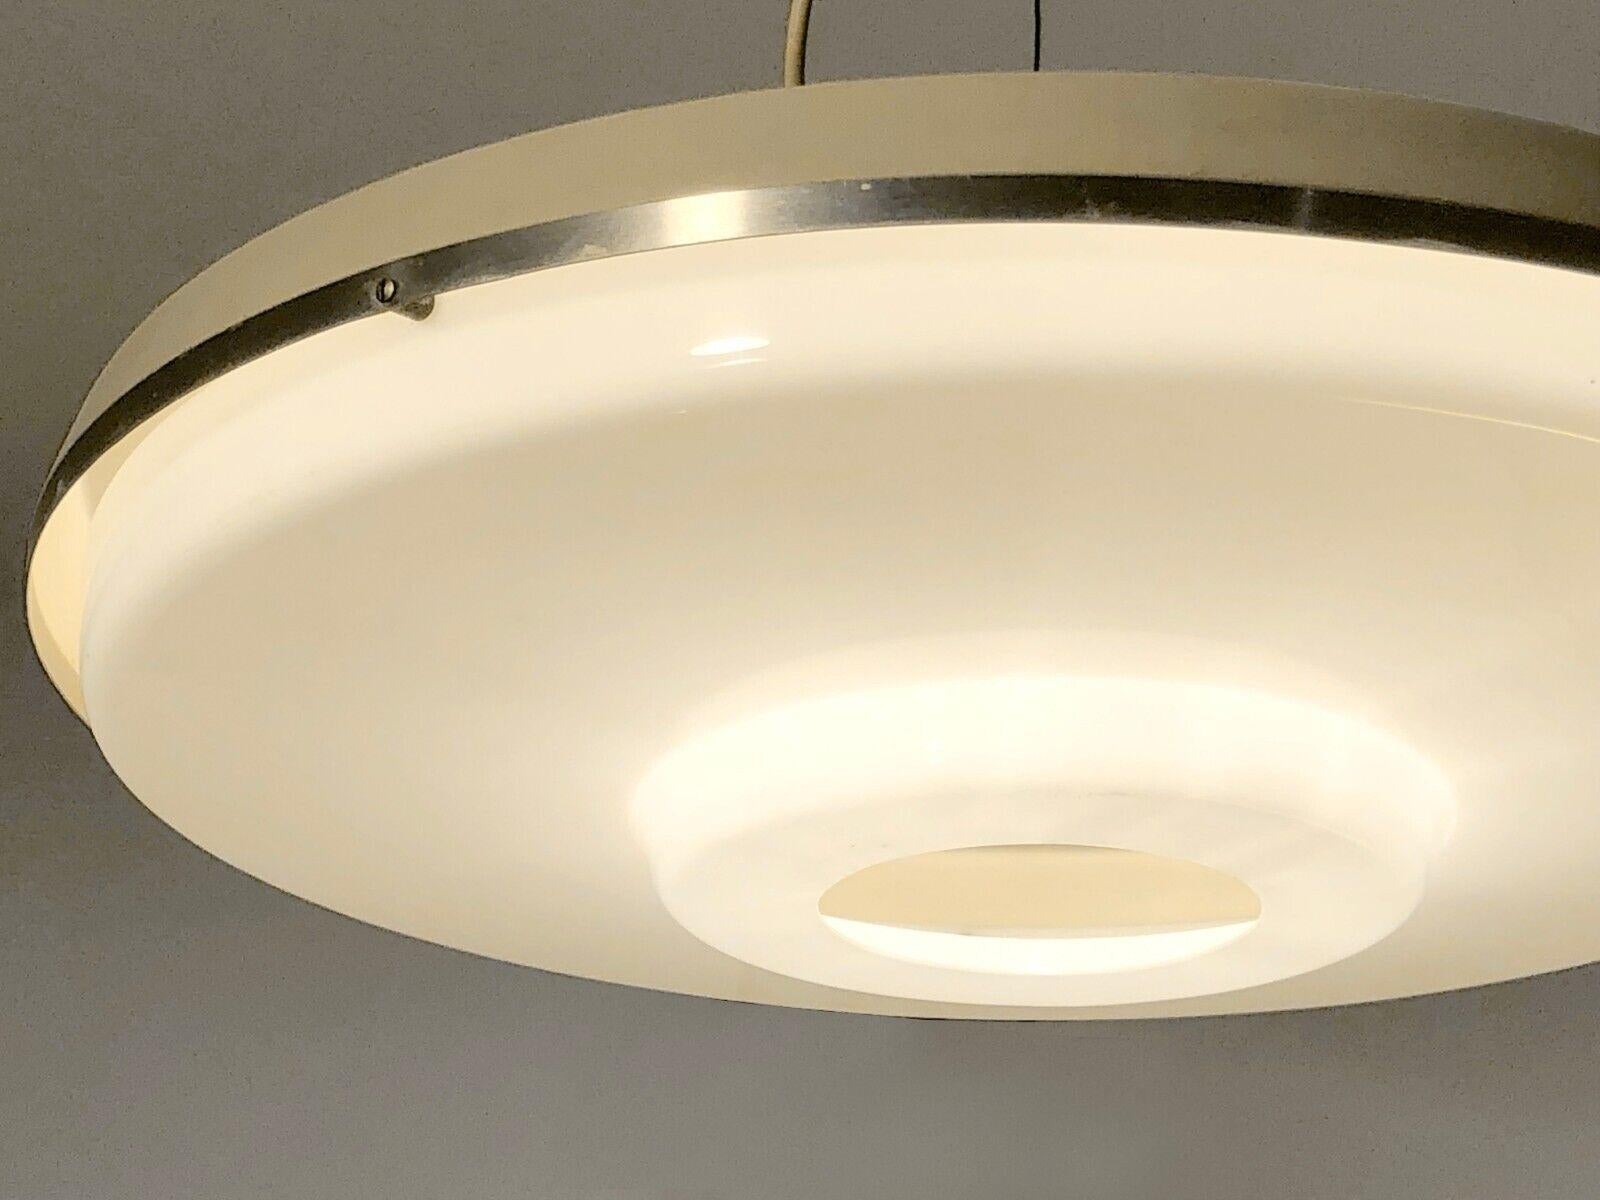 A MID-CENTURY-MODERN MODERNIST SPACE-AGE Ceiling Light by STILNOVO, Italy 1960  For Sale 3